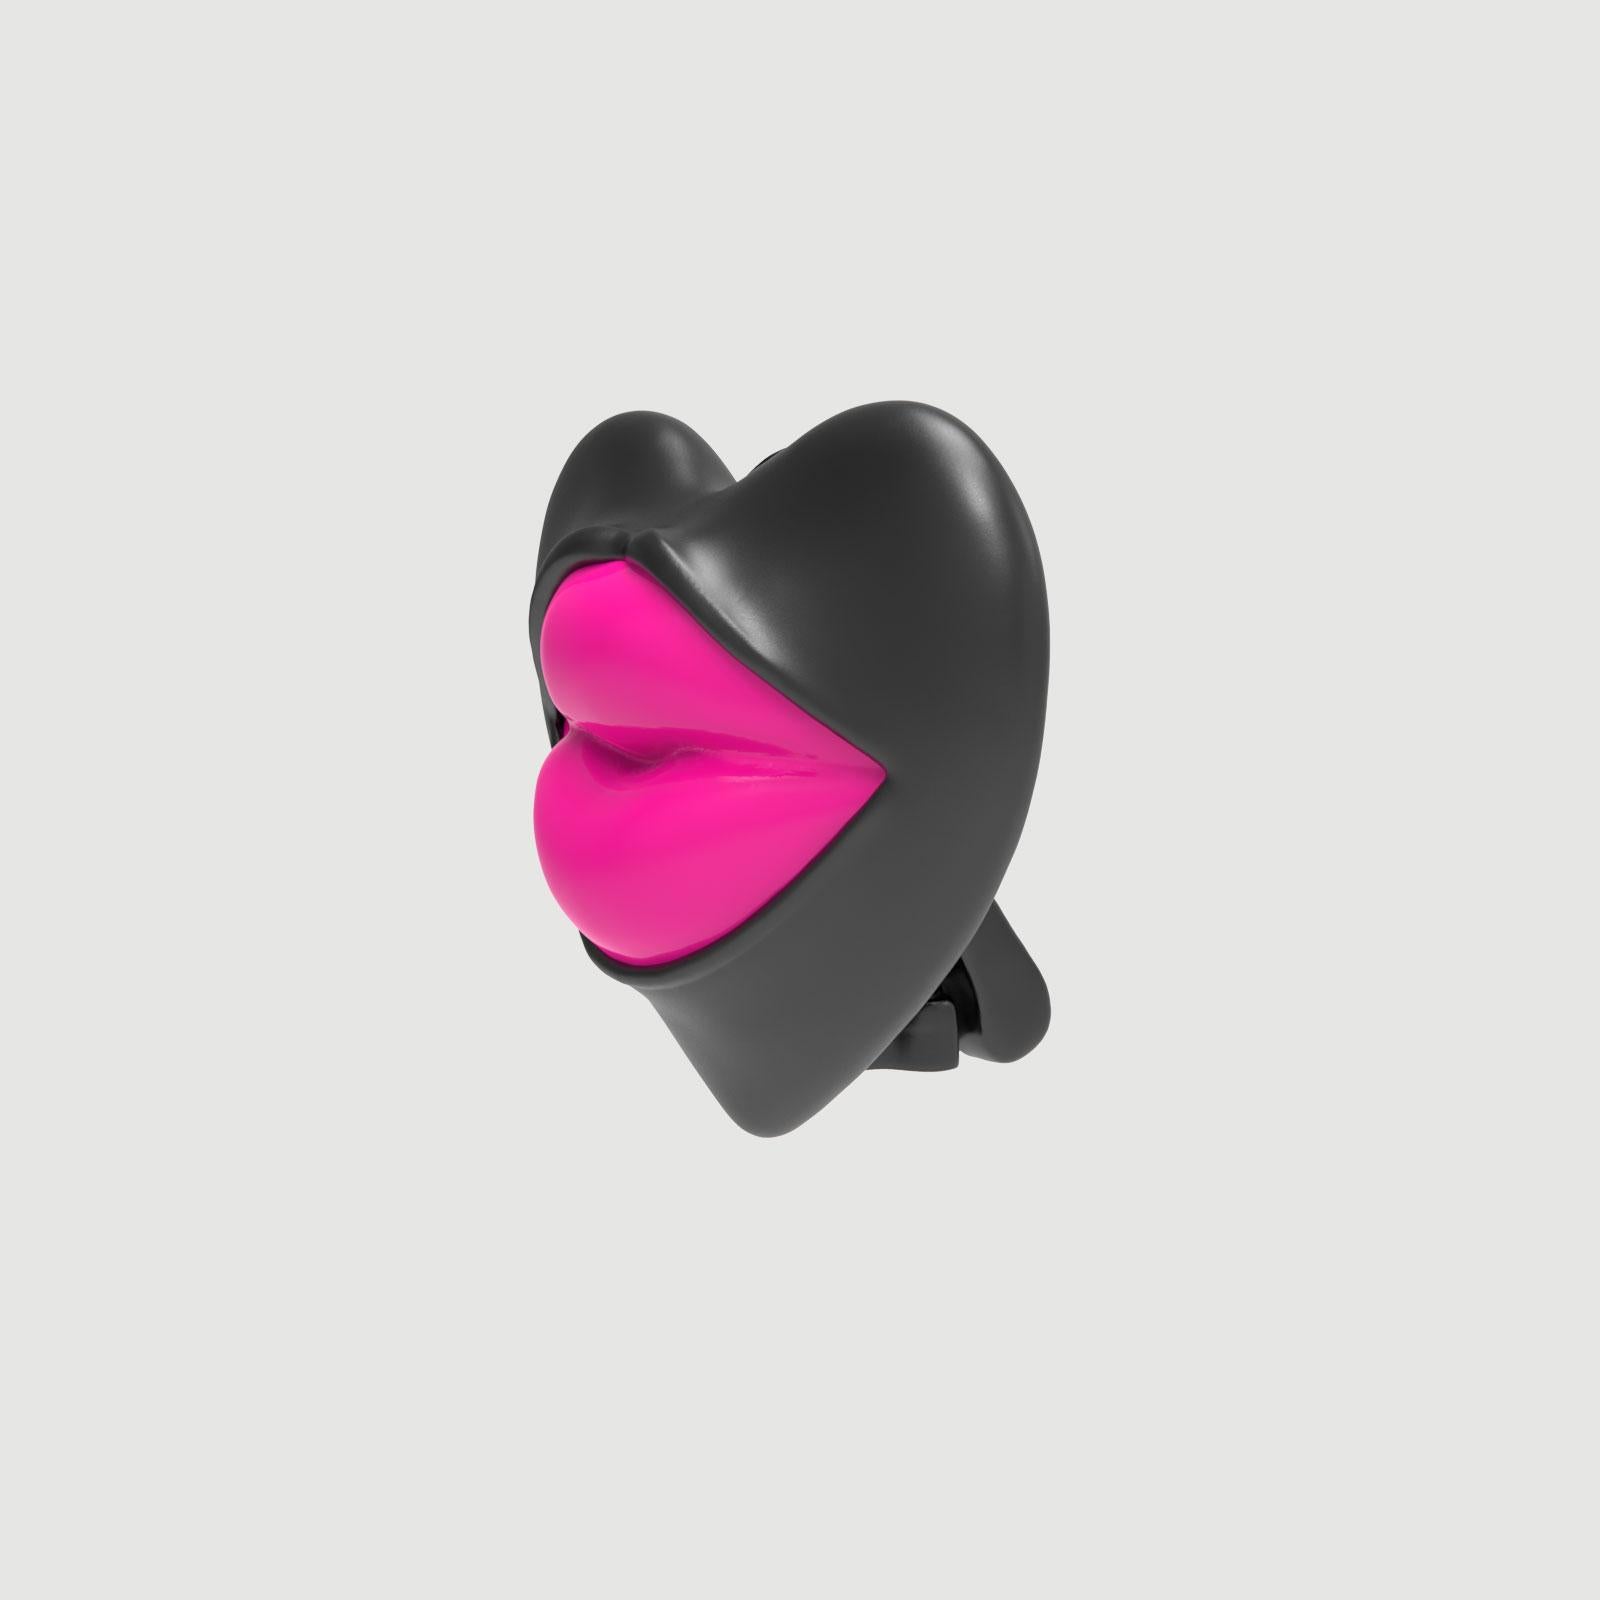 Sold as single. Pair and stack them. Please check other colors at our store front.

Introducing our stunning 🖤 Heart-Shaped Rhodium Plated Clip-On Earring with Enamel Lip 👄

Indulge in the perfect blend of sophistication and artistic expression